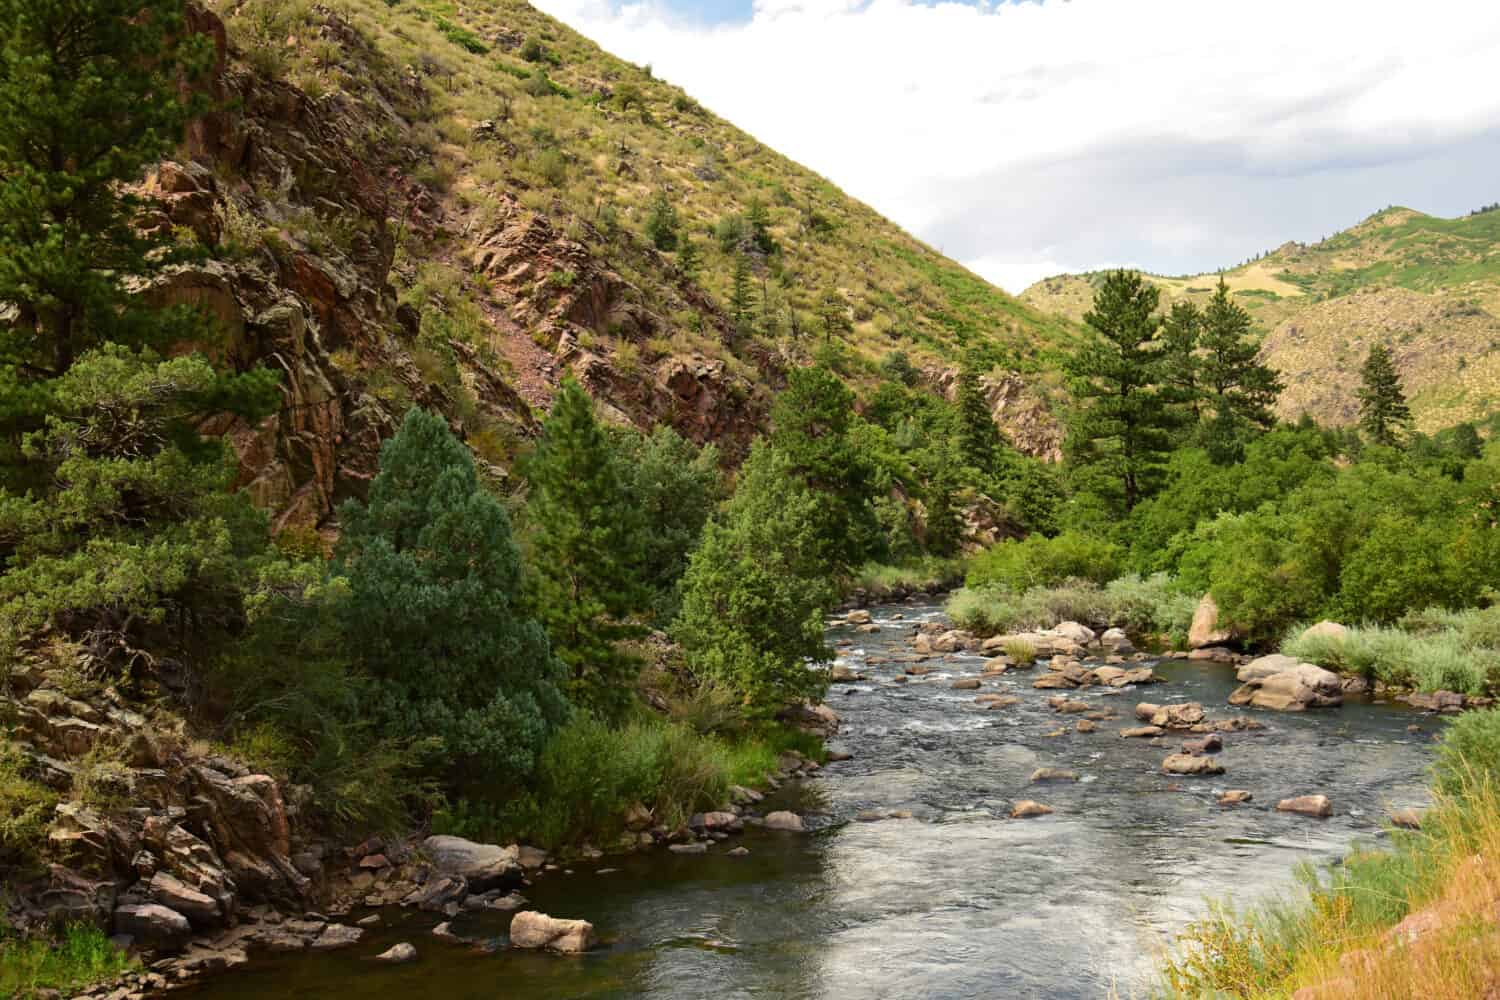  peaceful scene along foothills of  the south platte river in waterton canyon, littleton,  colorado